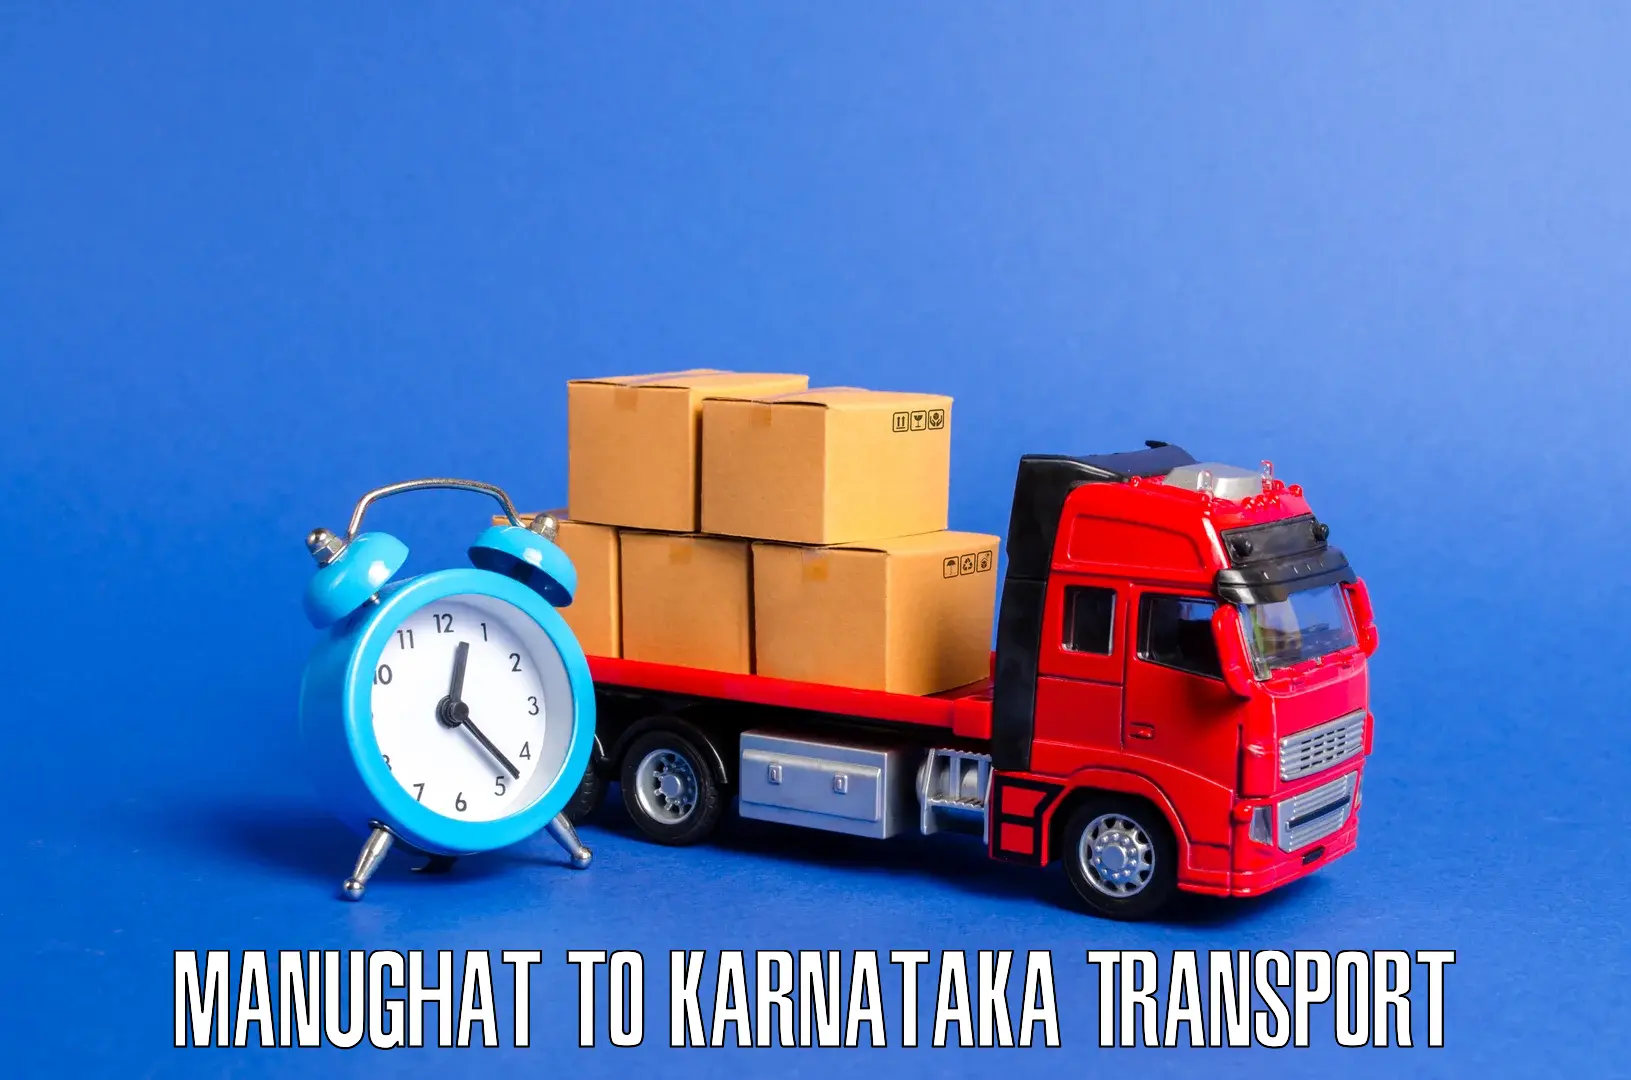 Daily parcel service transport in Manughat to Chikkamagaluru